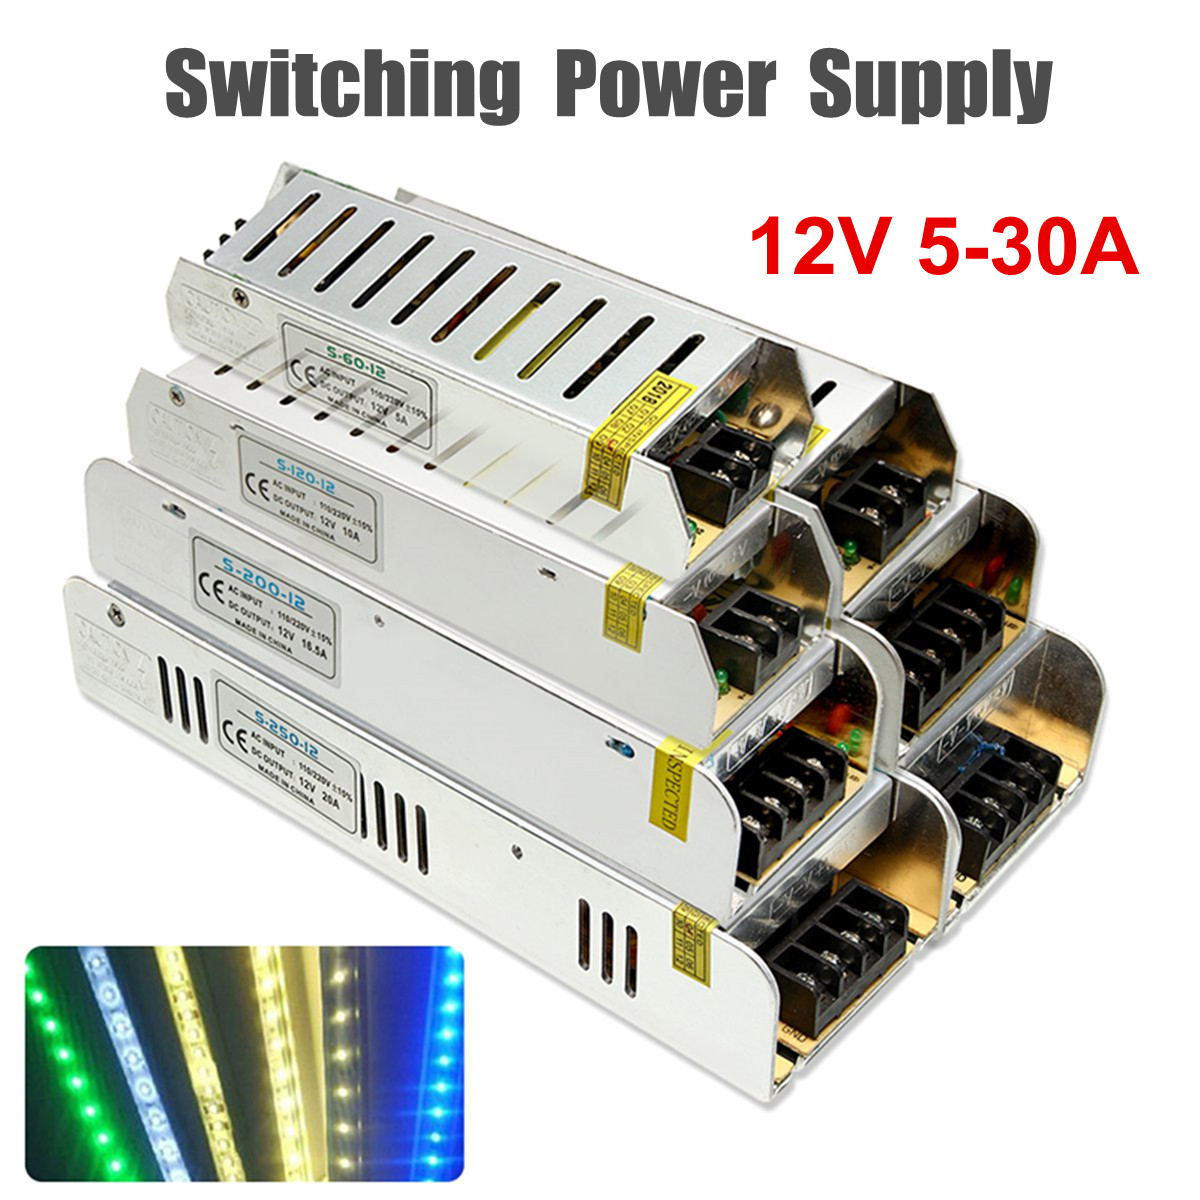 DC-12V-5-30A-Sub-Mini-Universal-Regulated-Switching-Power-Supply-For-LED-Light-1339310-1